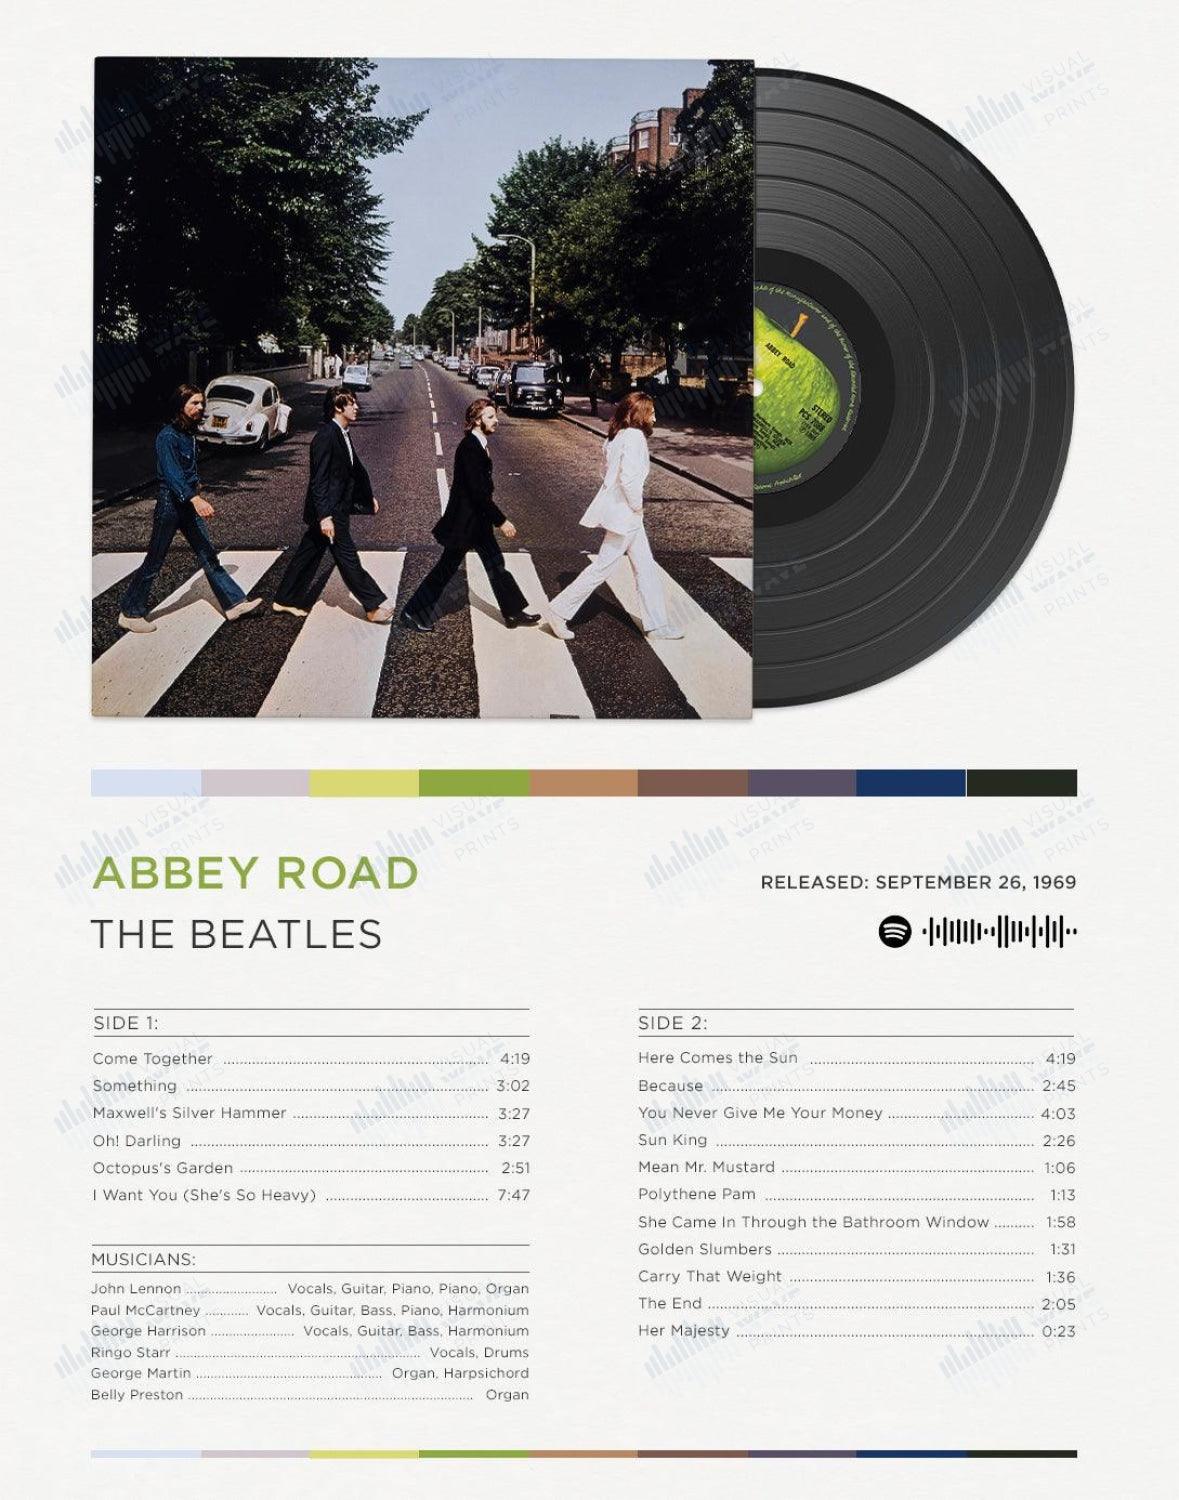 Album Art: Abbey Road by The Beatles – Visual Wave Prints